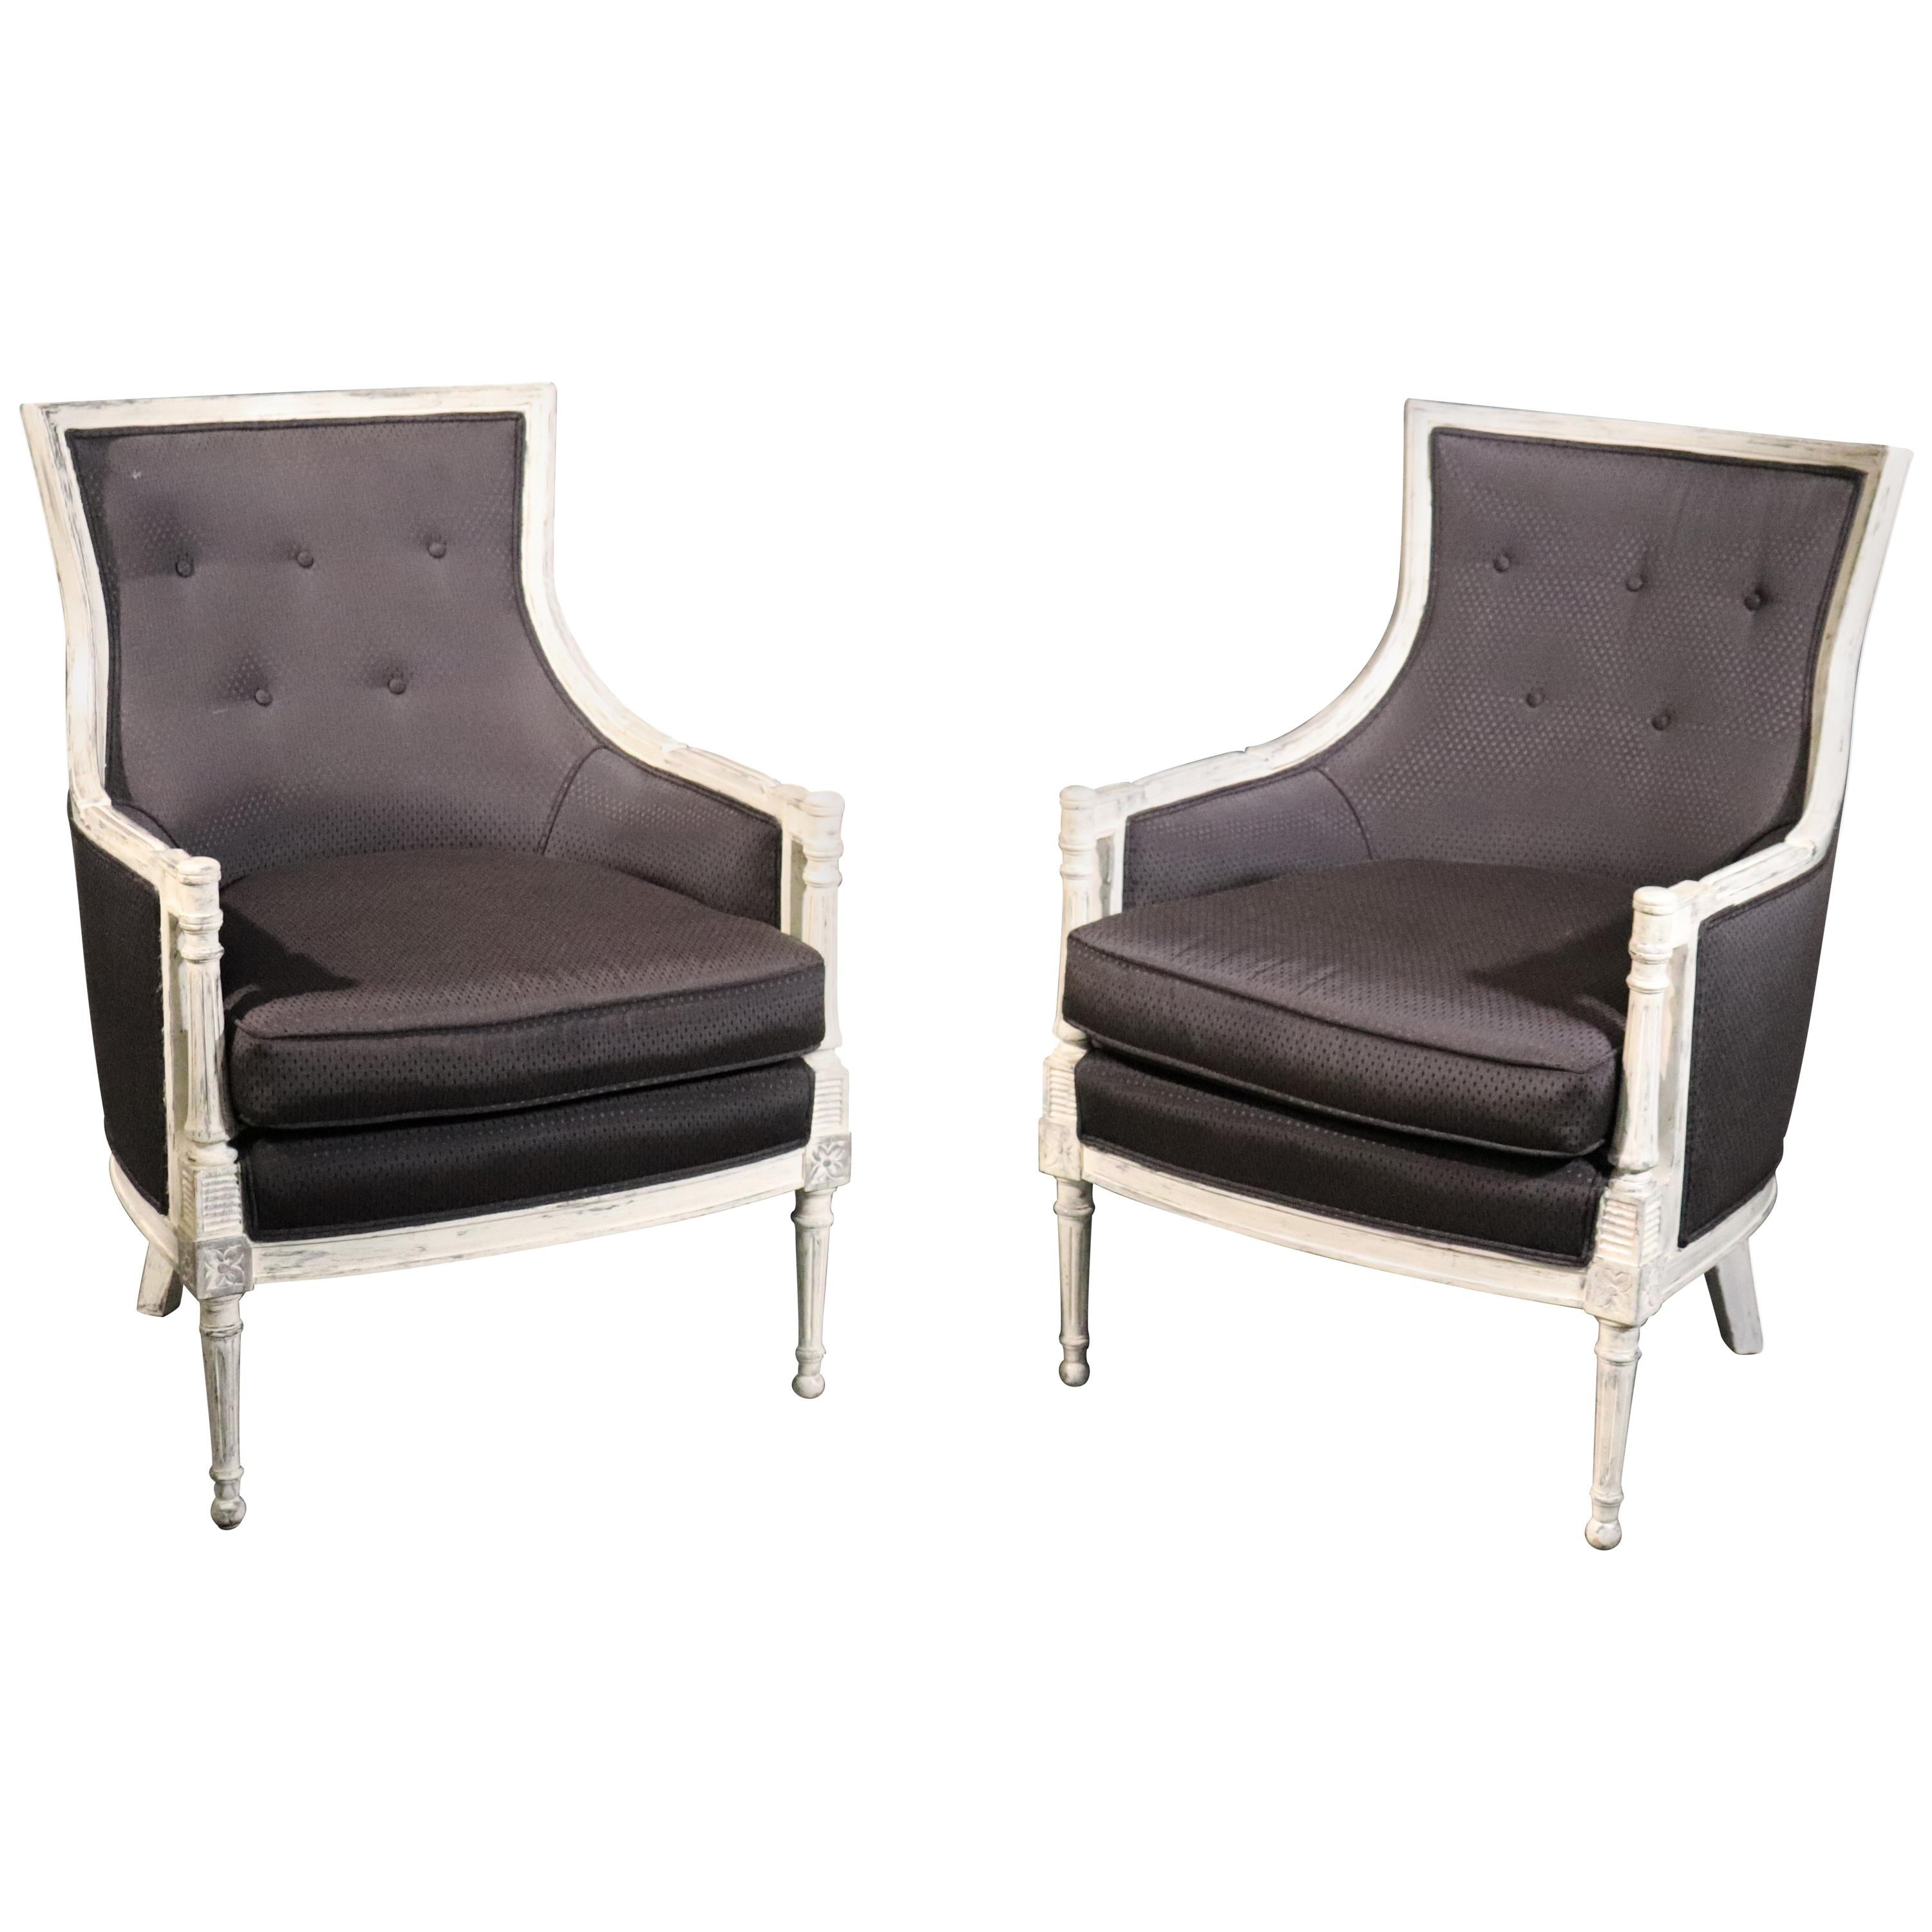 Pair of Distressed Painted Black Upholstered French Louis XVI Bergère Chairs